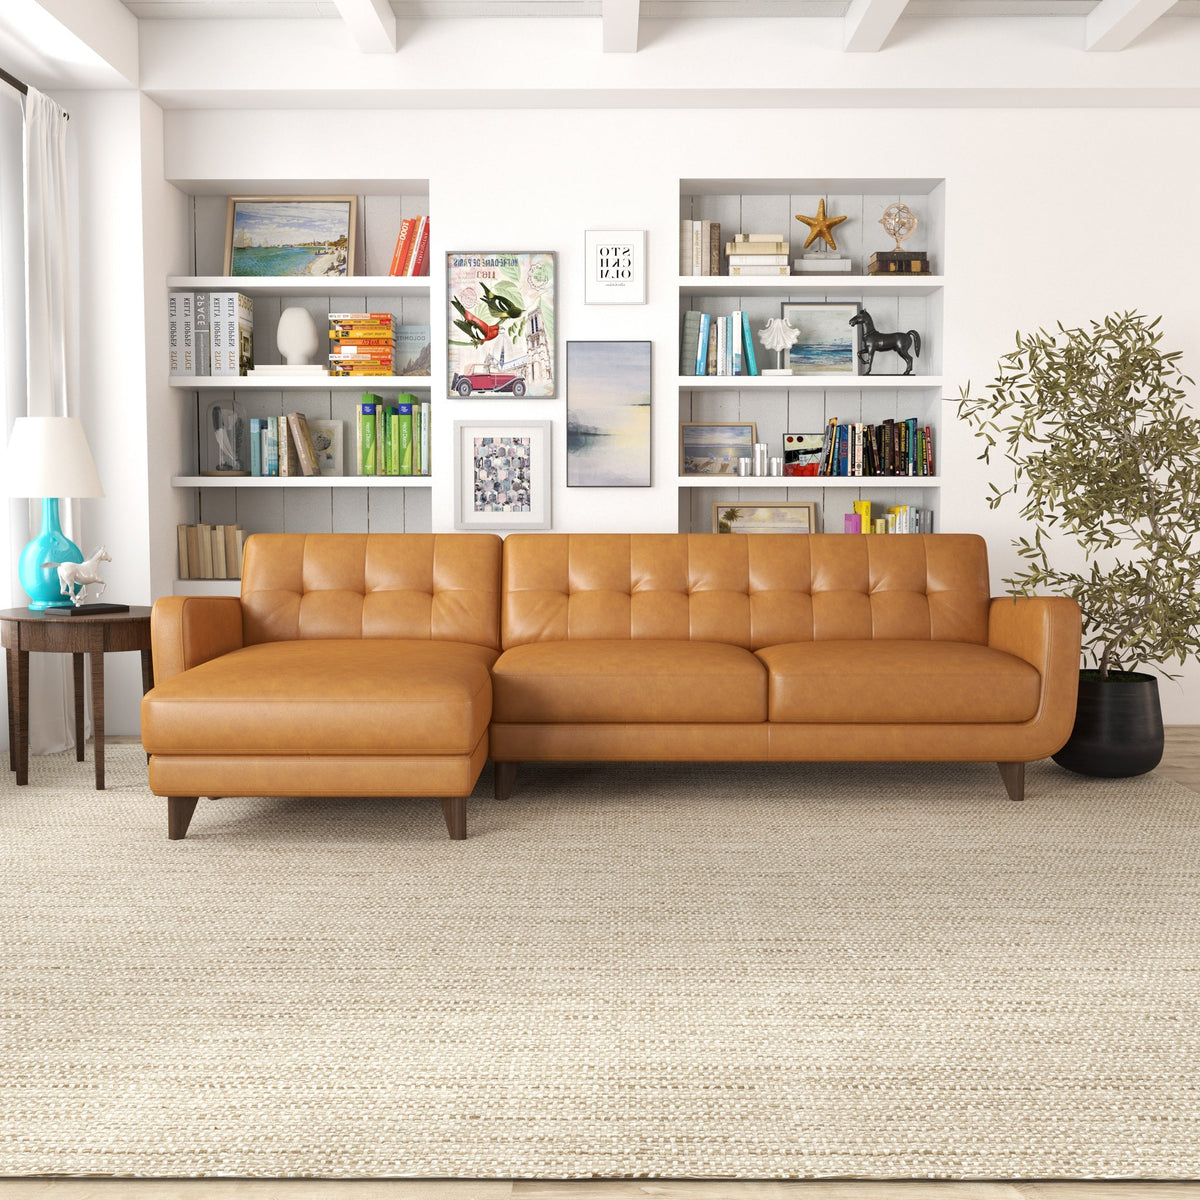 Cassie Sectional Sofa - Tan Leather Left Facing | MidinMod | TX | Best Furniture stores in Houston